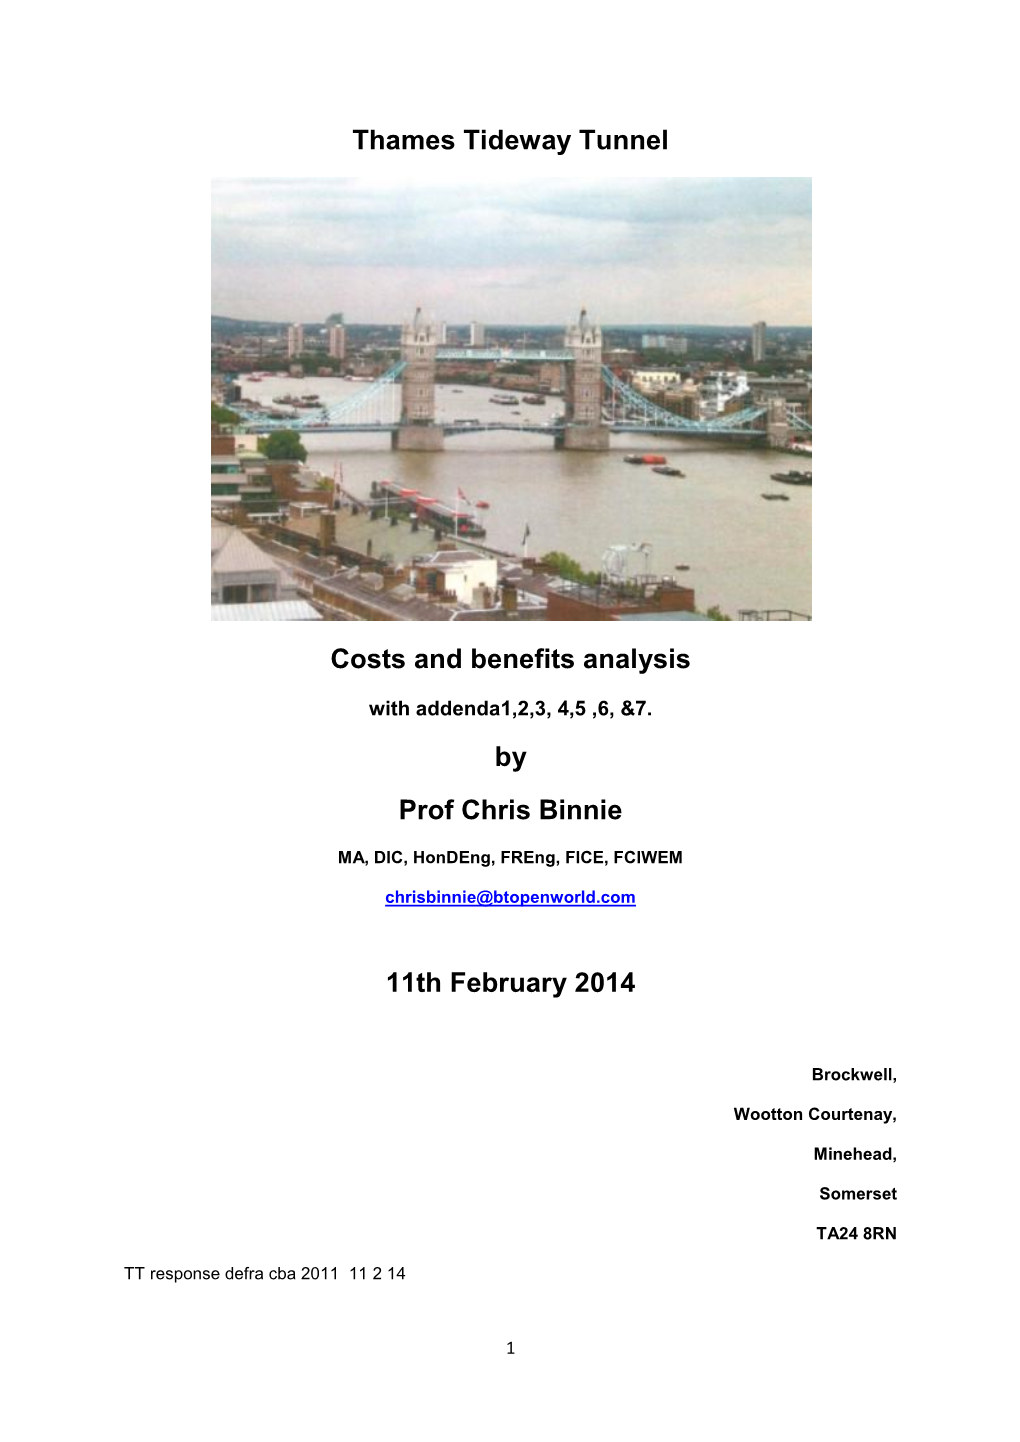 Thames Tideway Tunnel Costs and Benefits Analysis by Prof Chris